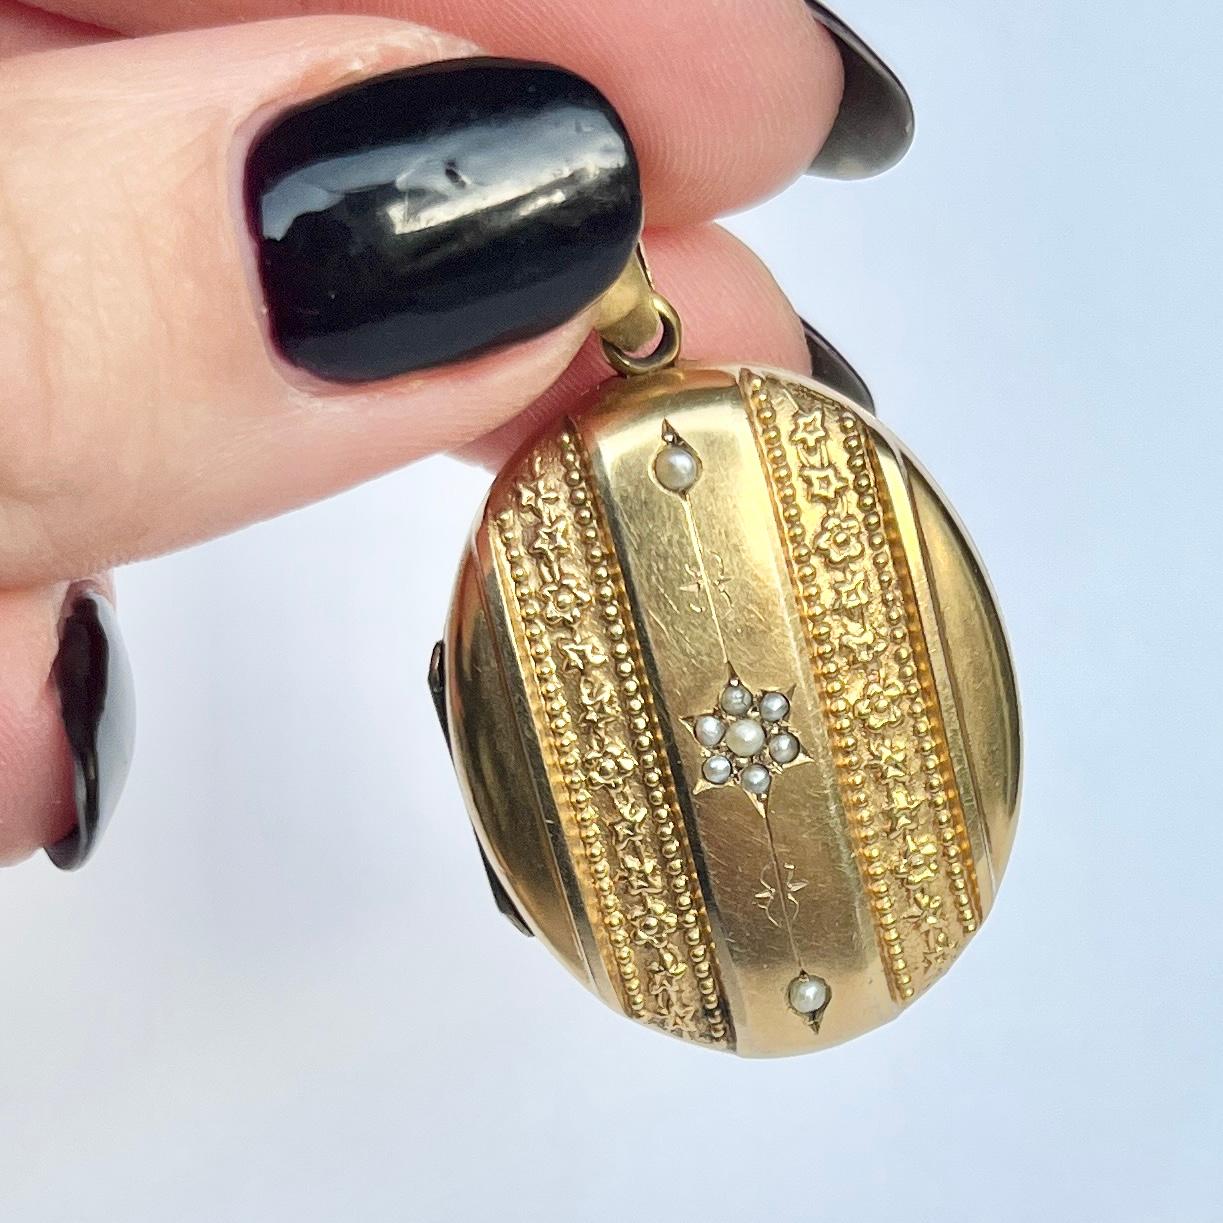 This gorgeous locket is modelled in glossy 15 carat yellow gold. The inside is left empty to fill with your memories! There is one glass pane inside the locket.

Locket Dimensions 26x44 mm

Weight: 11g